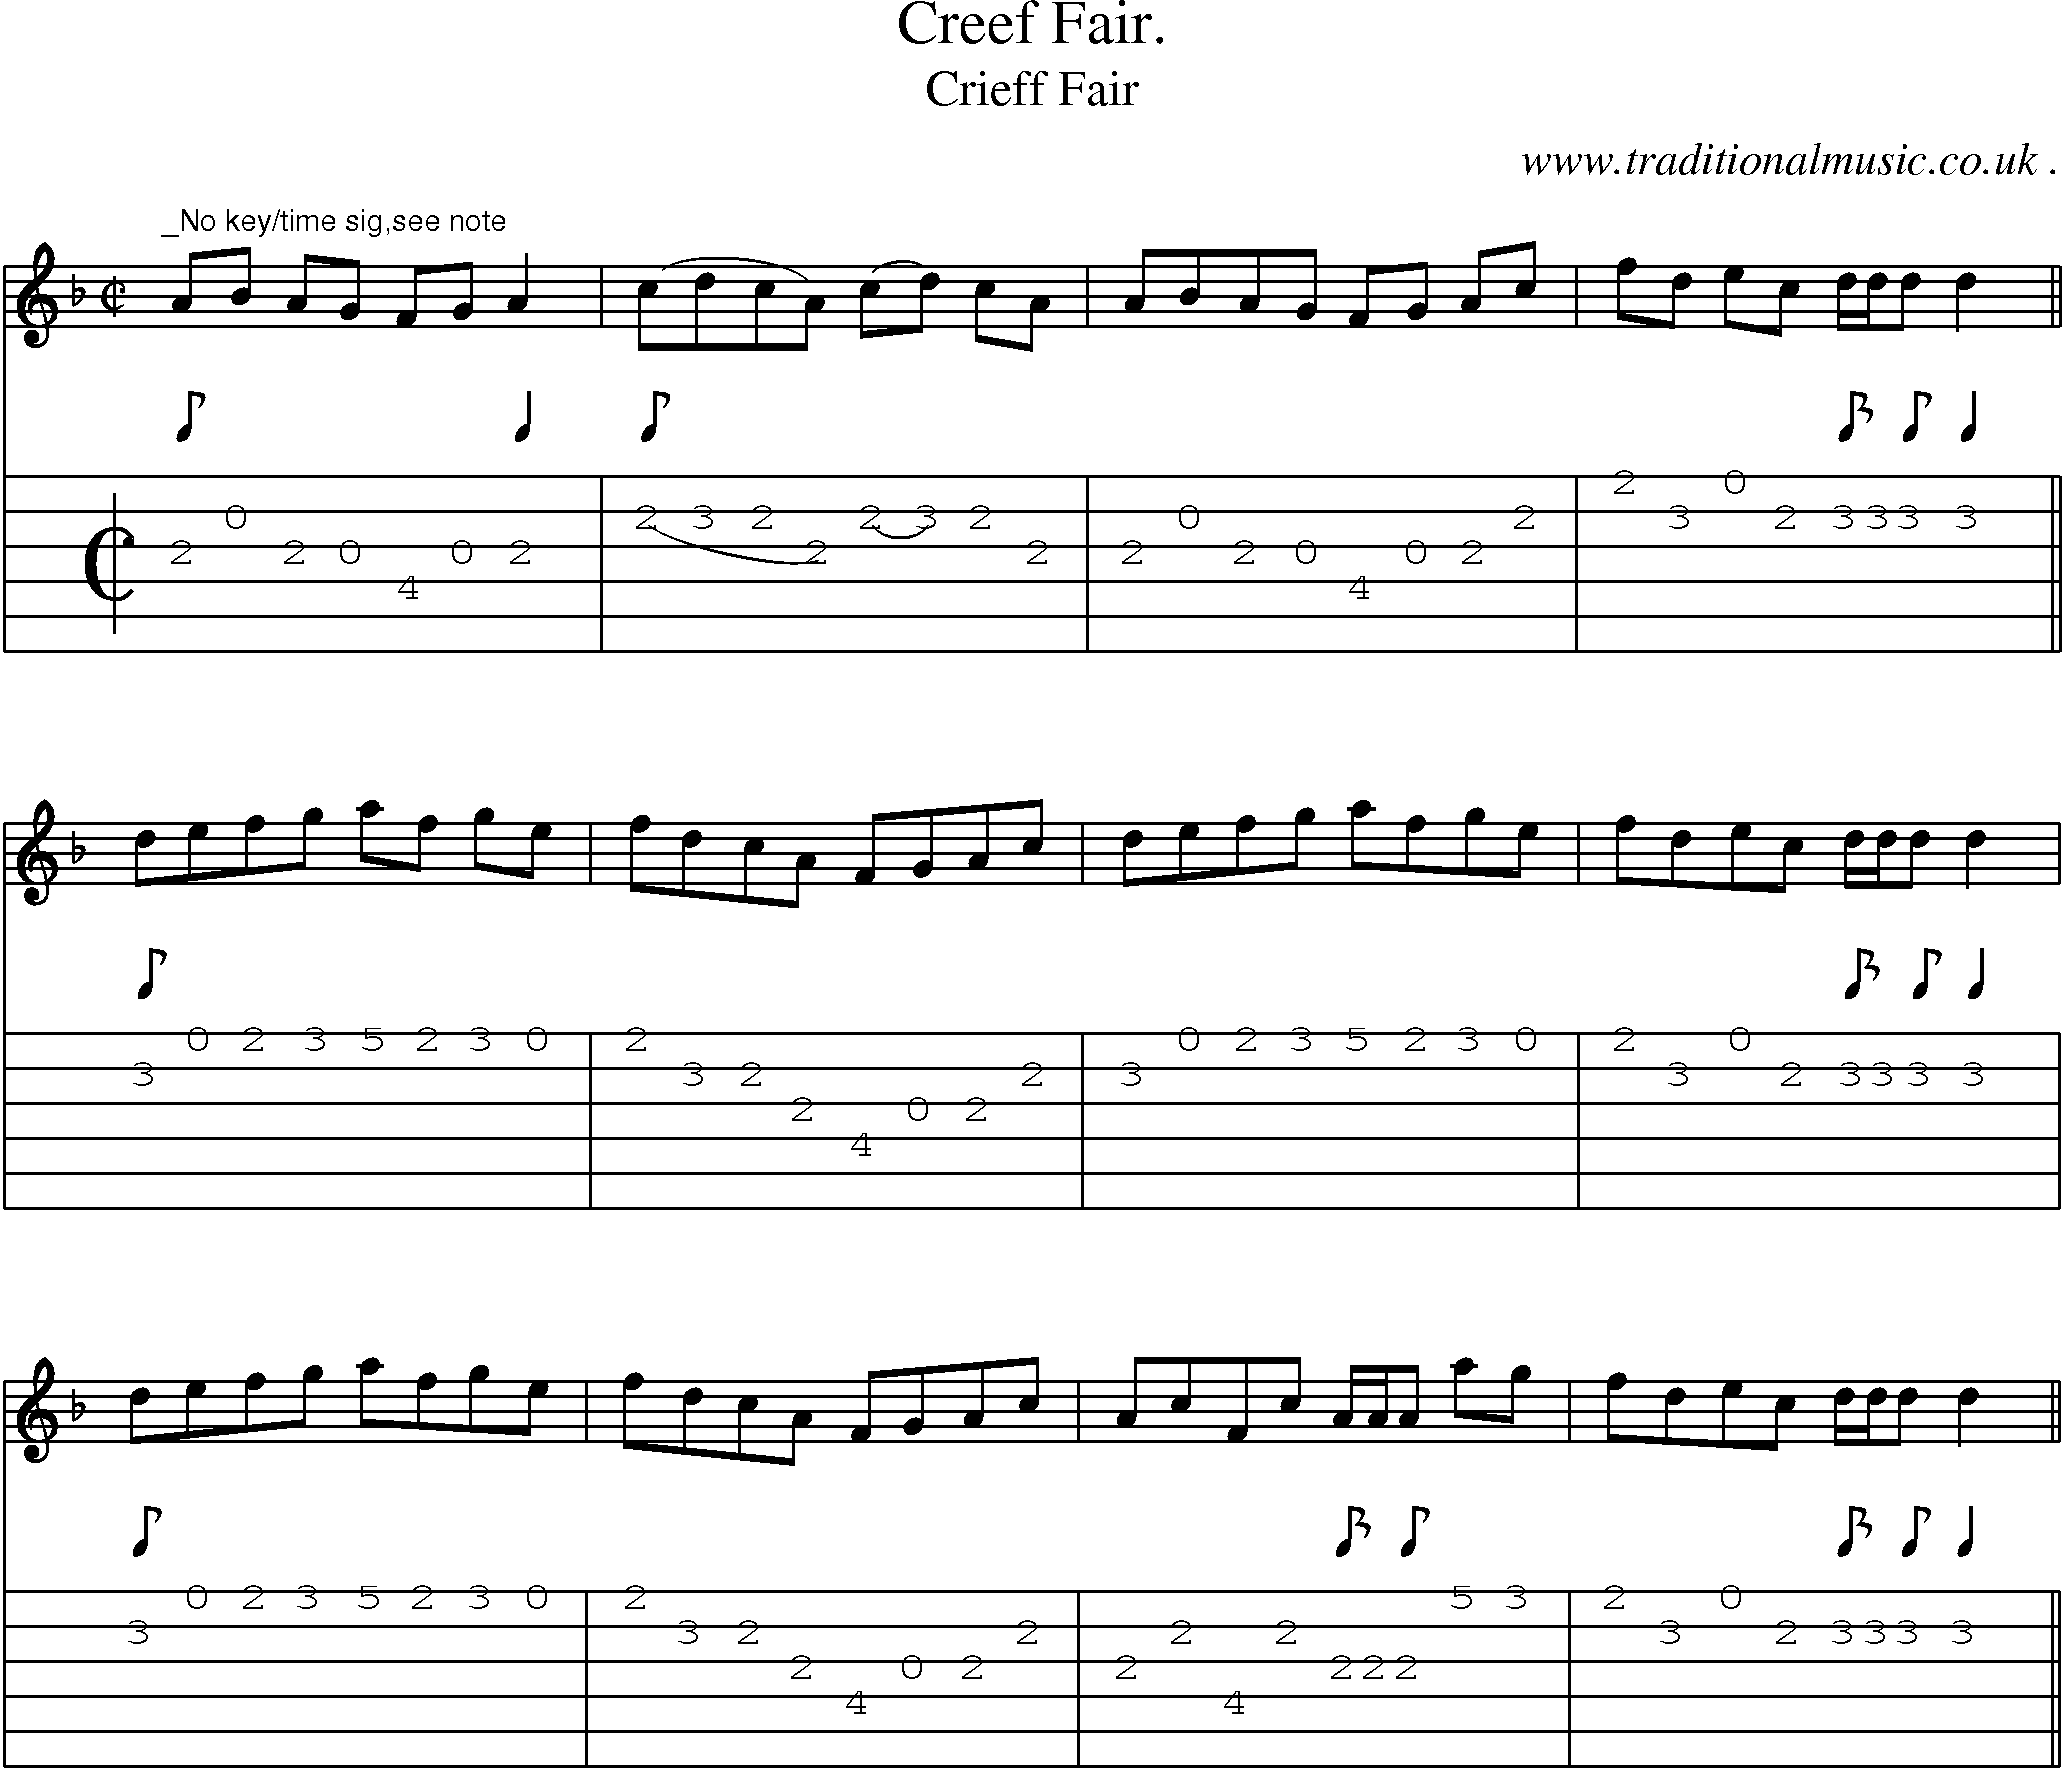 Sheet-Music and Guitar Tabs for Creef Fair